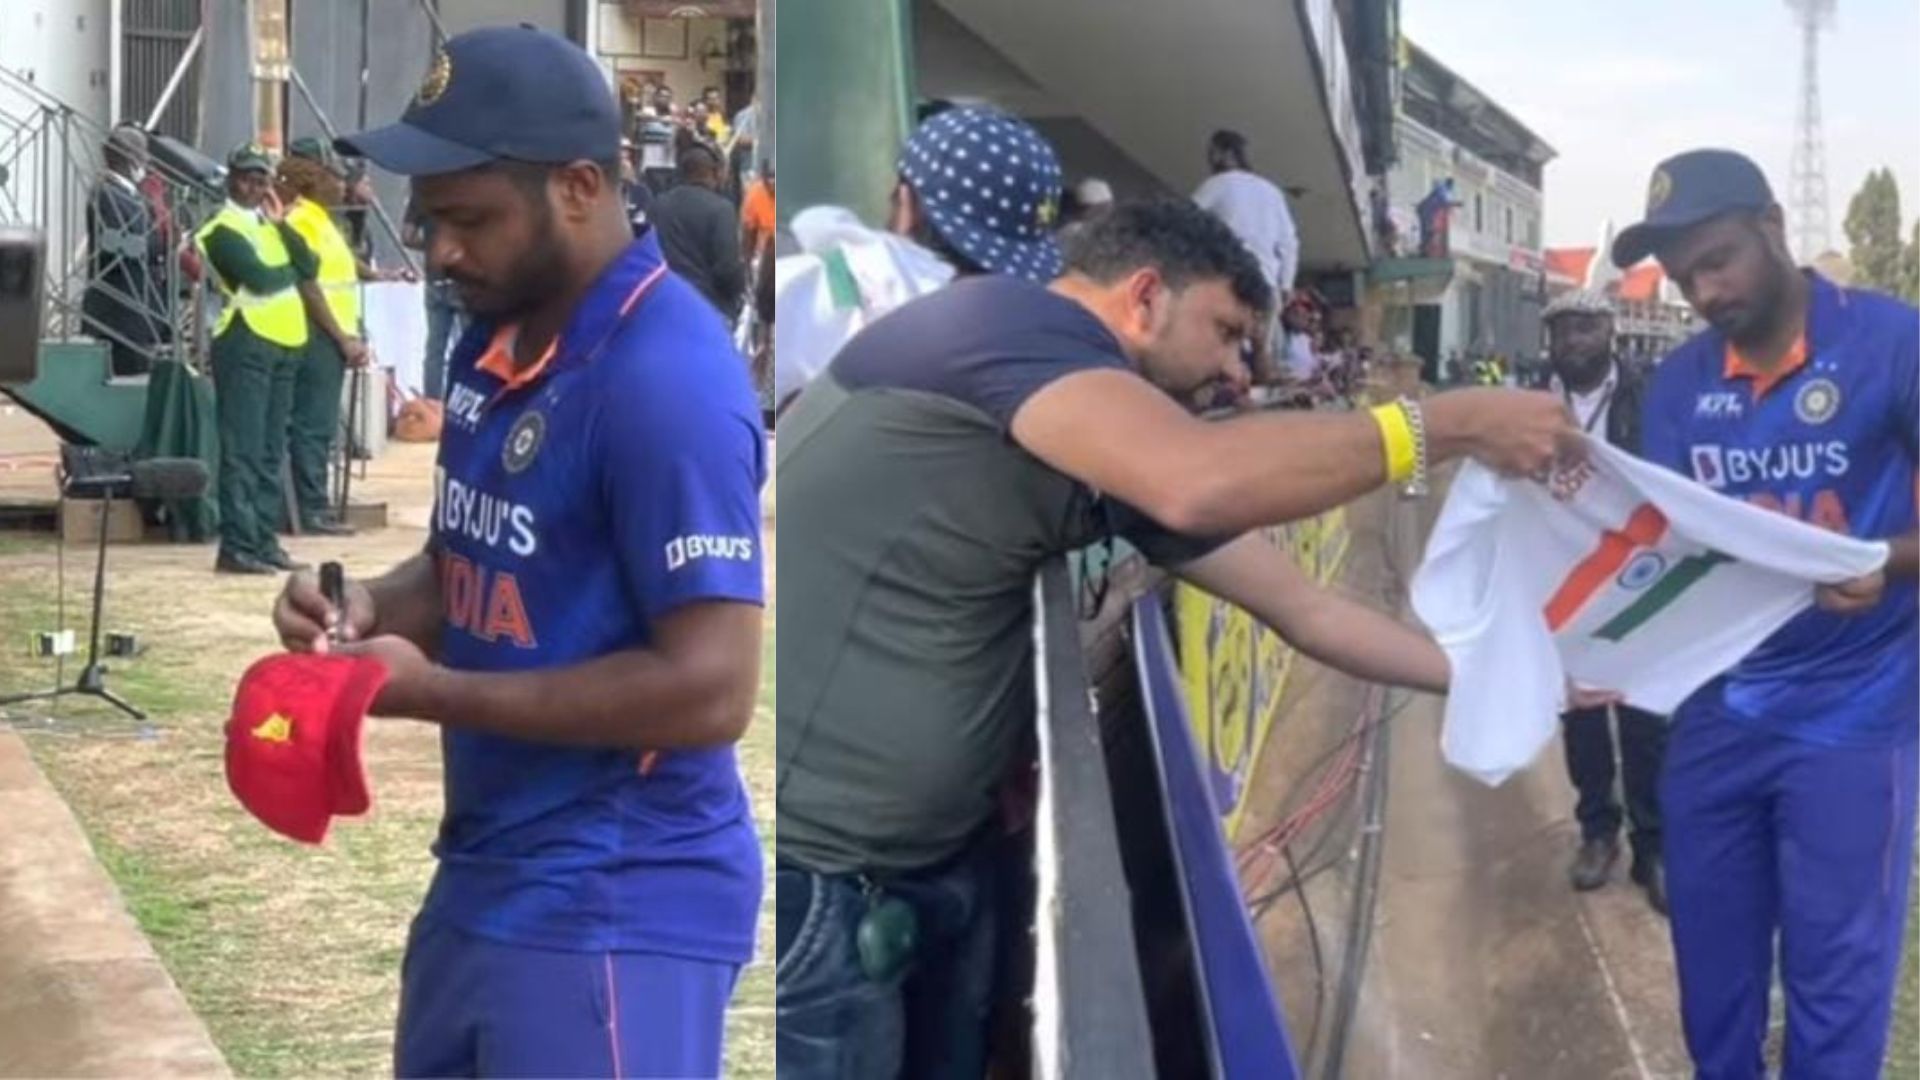 Sanju Samson made the day of Indian fans who had come to support him on Sunday. (P.C.:Vimal Kumar YouTube)